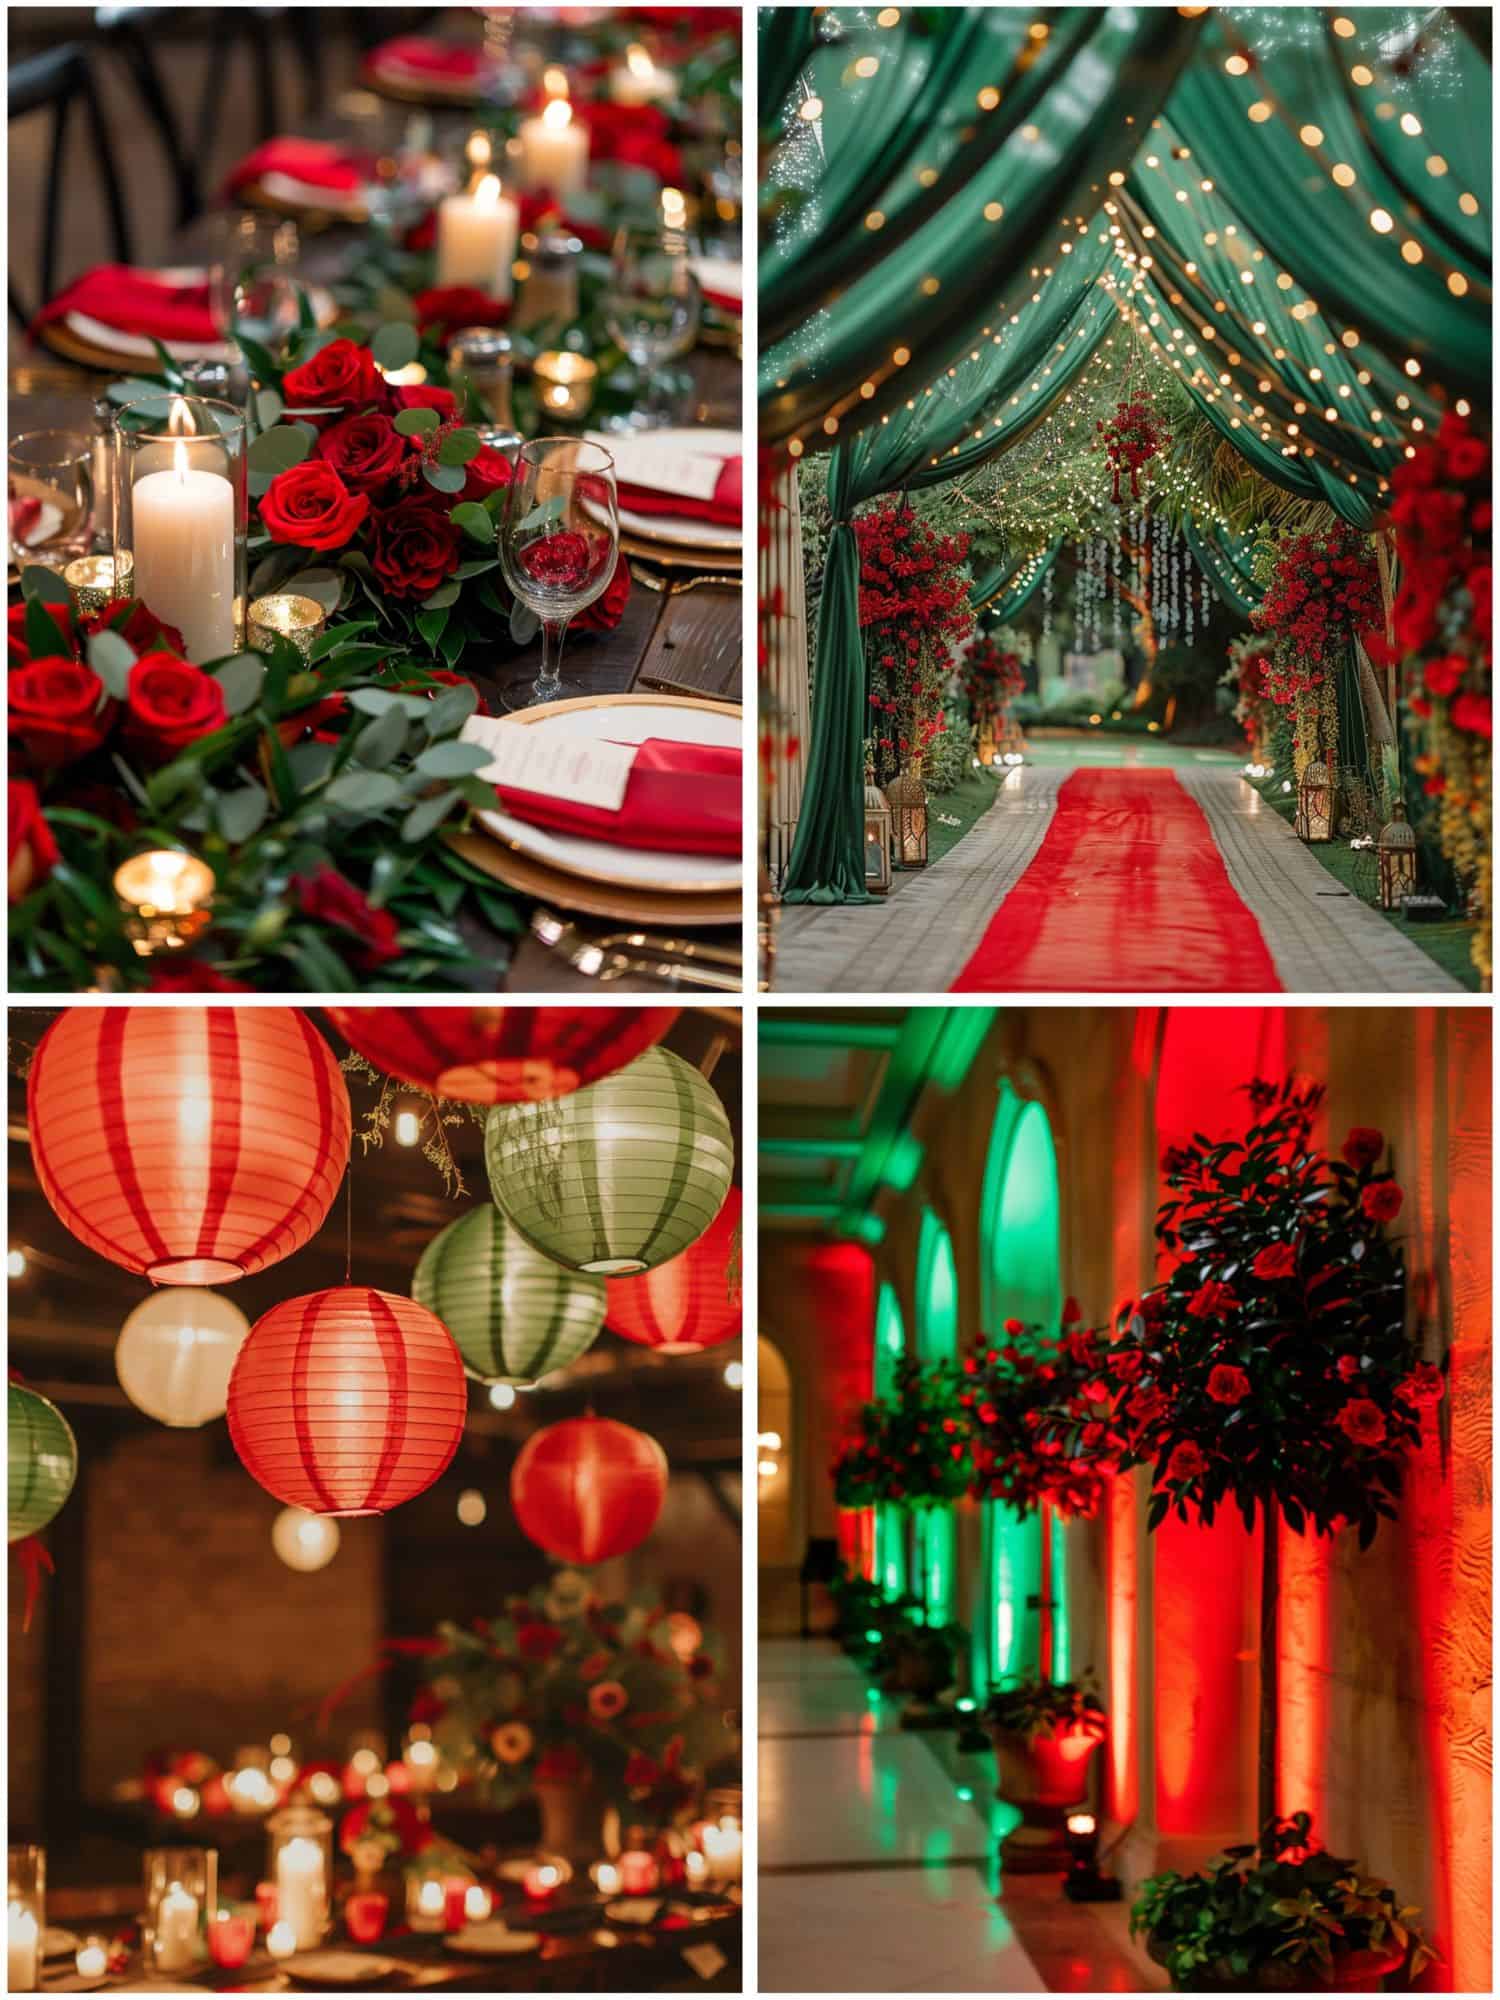 red and green decor ideas for wedding